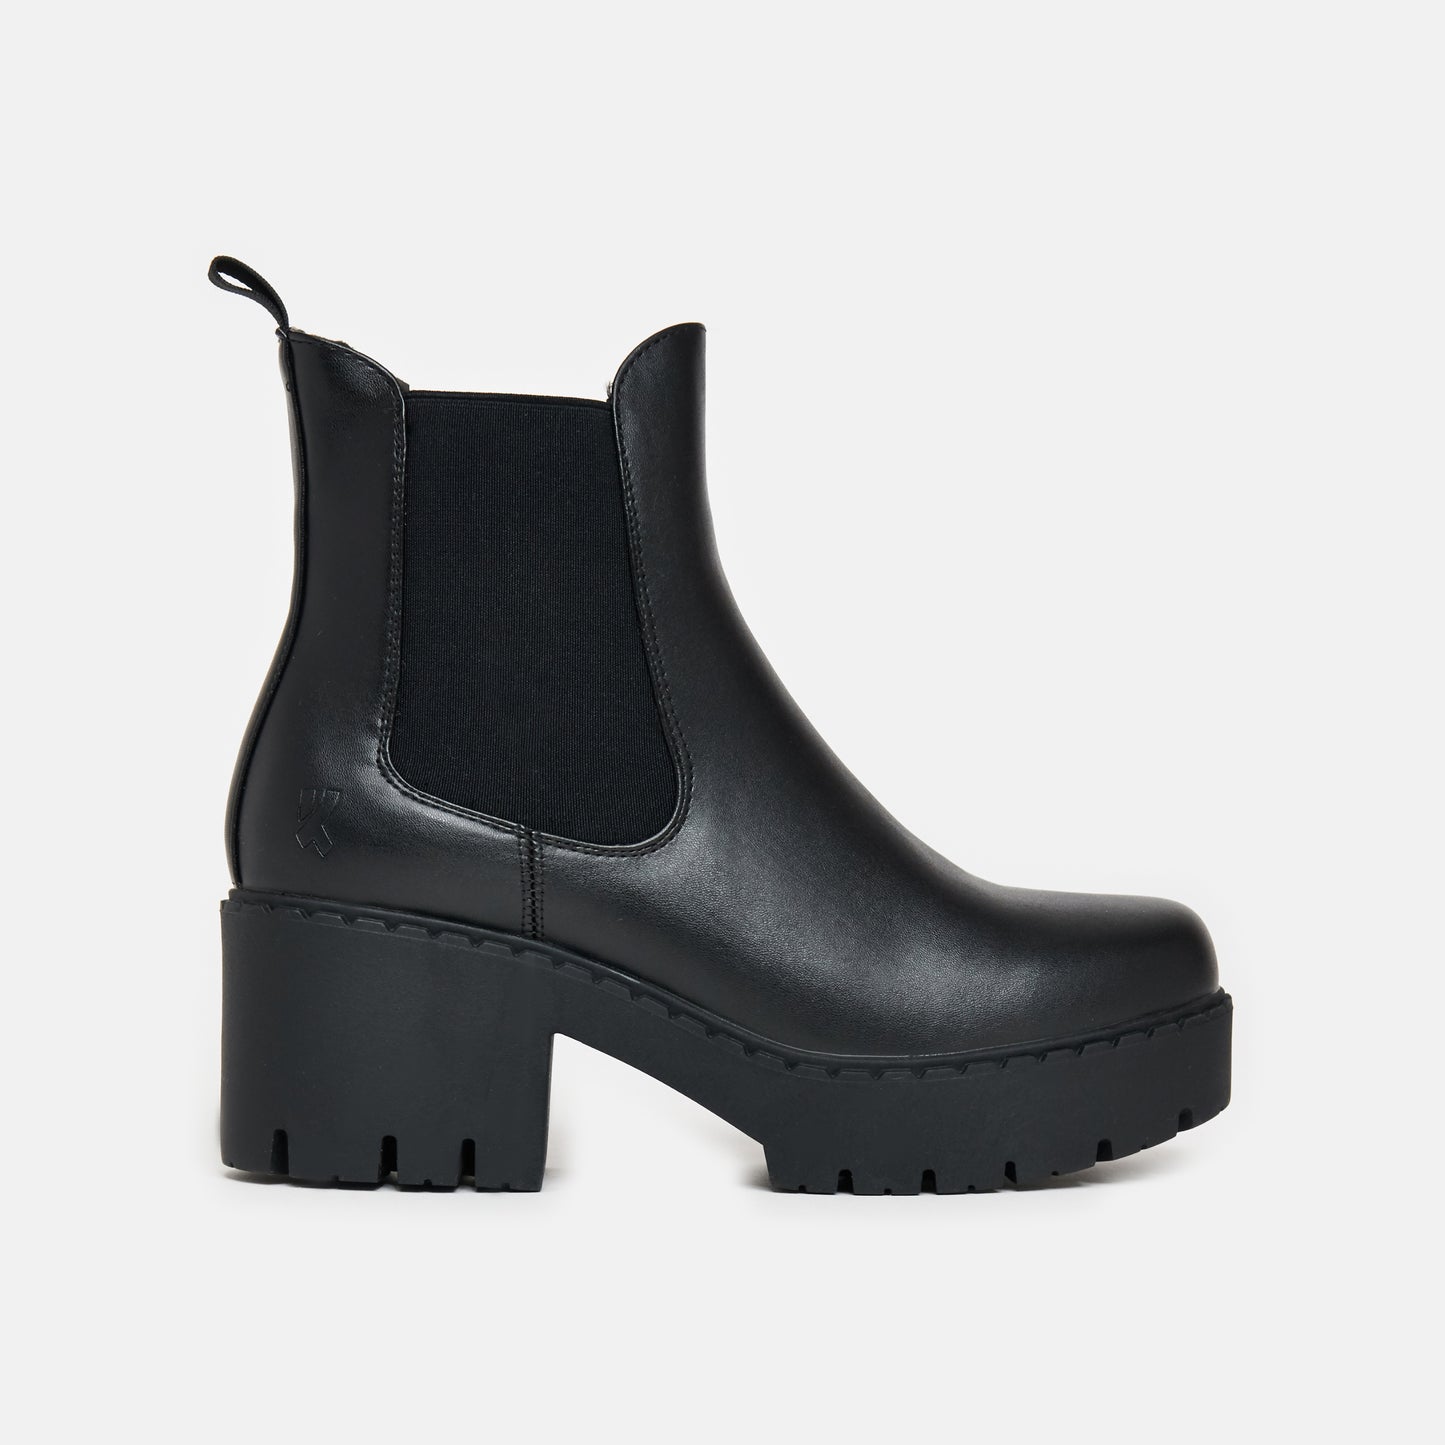 Orson Switch Chelsea Boots - Ankle Boots - KOI Footwear - Black - Side View